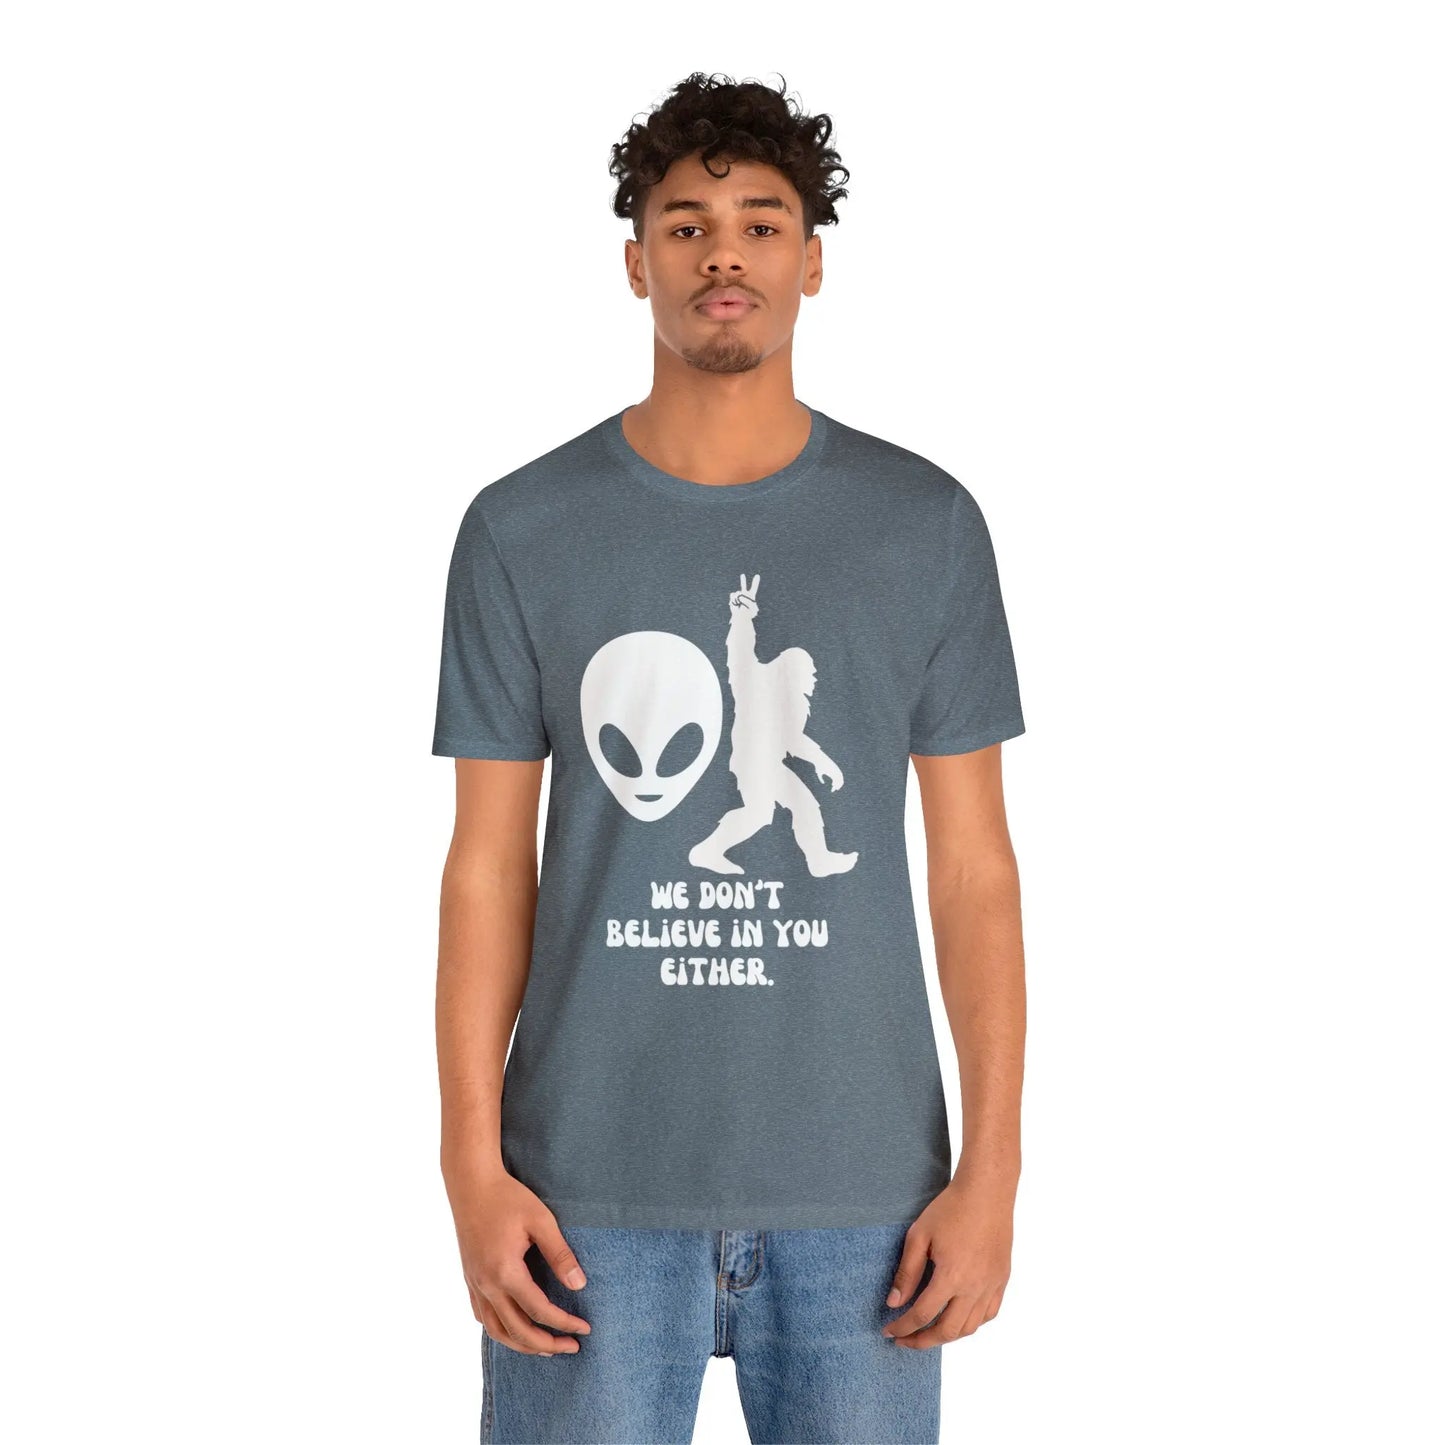 Alien and Bigfoot we don’t believe in you either t shirt